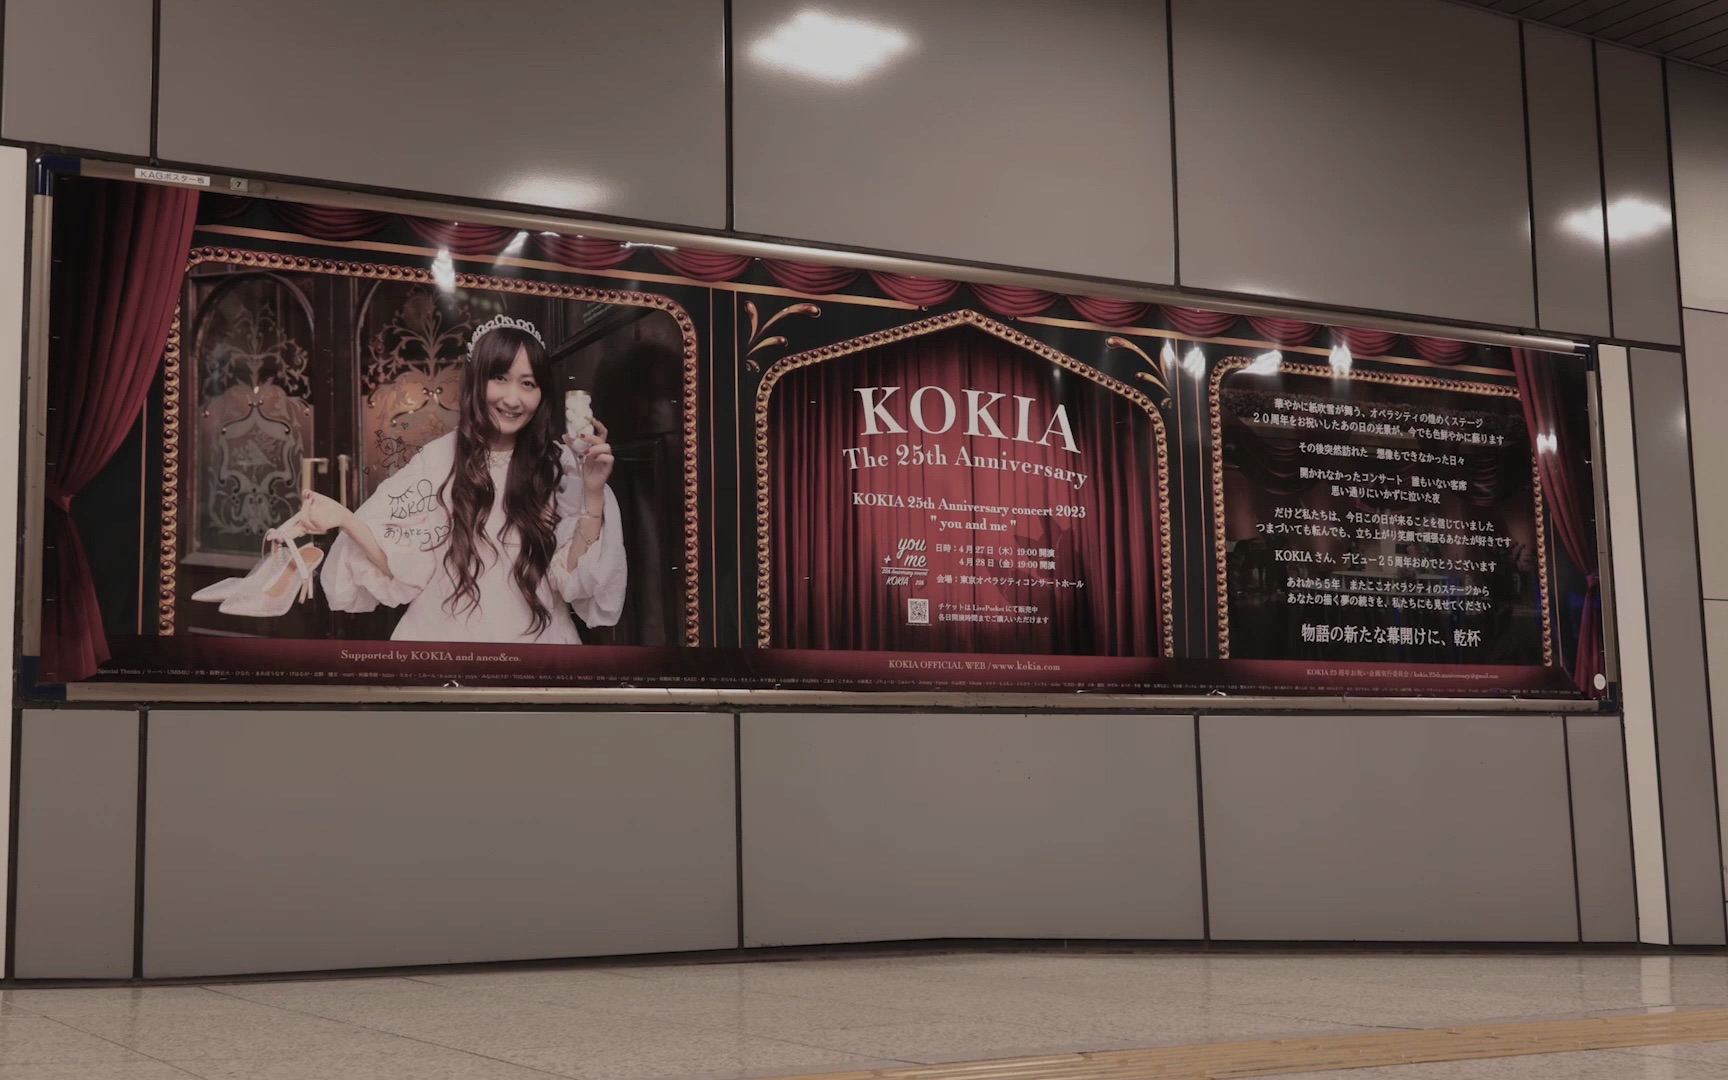 KOKIA 25th Anniversary Concert  “you and me”  exclusive streaming!!